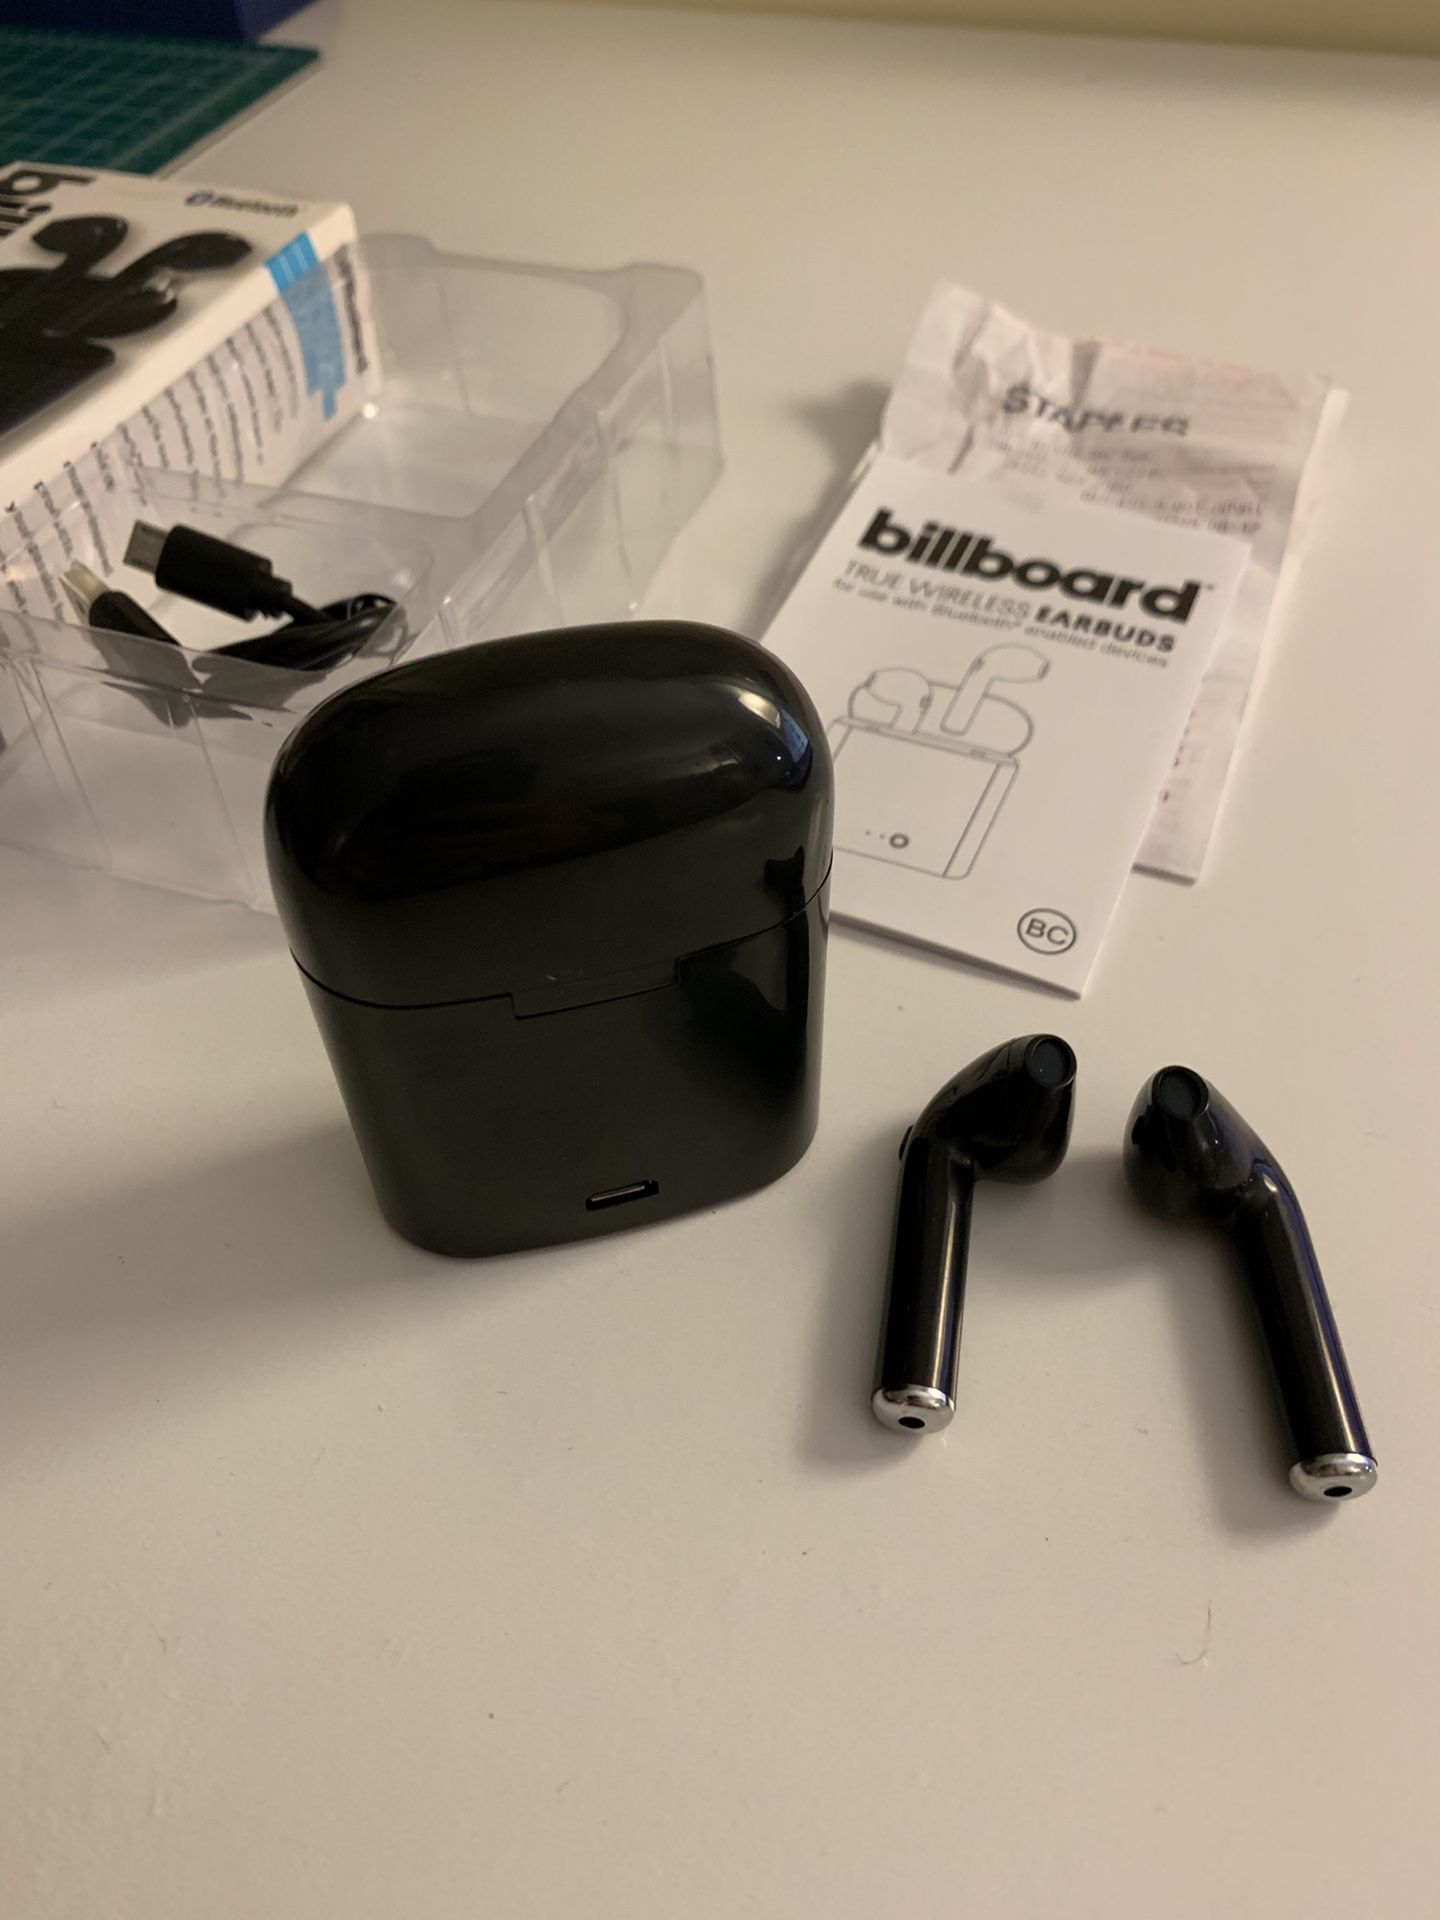 Billboard Black Wireless Earbuds with Charging Case